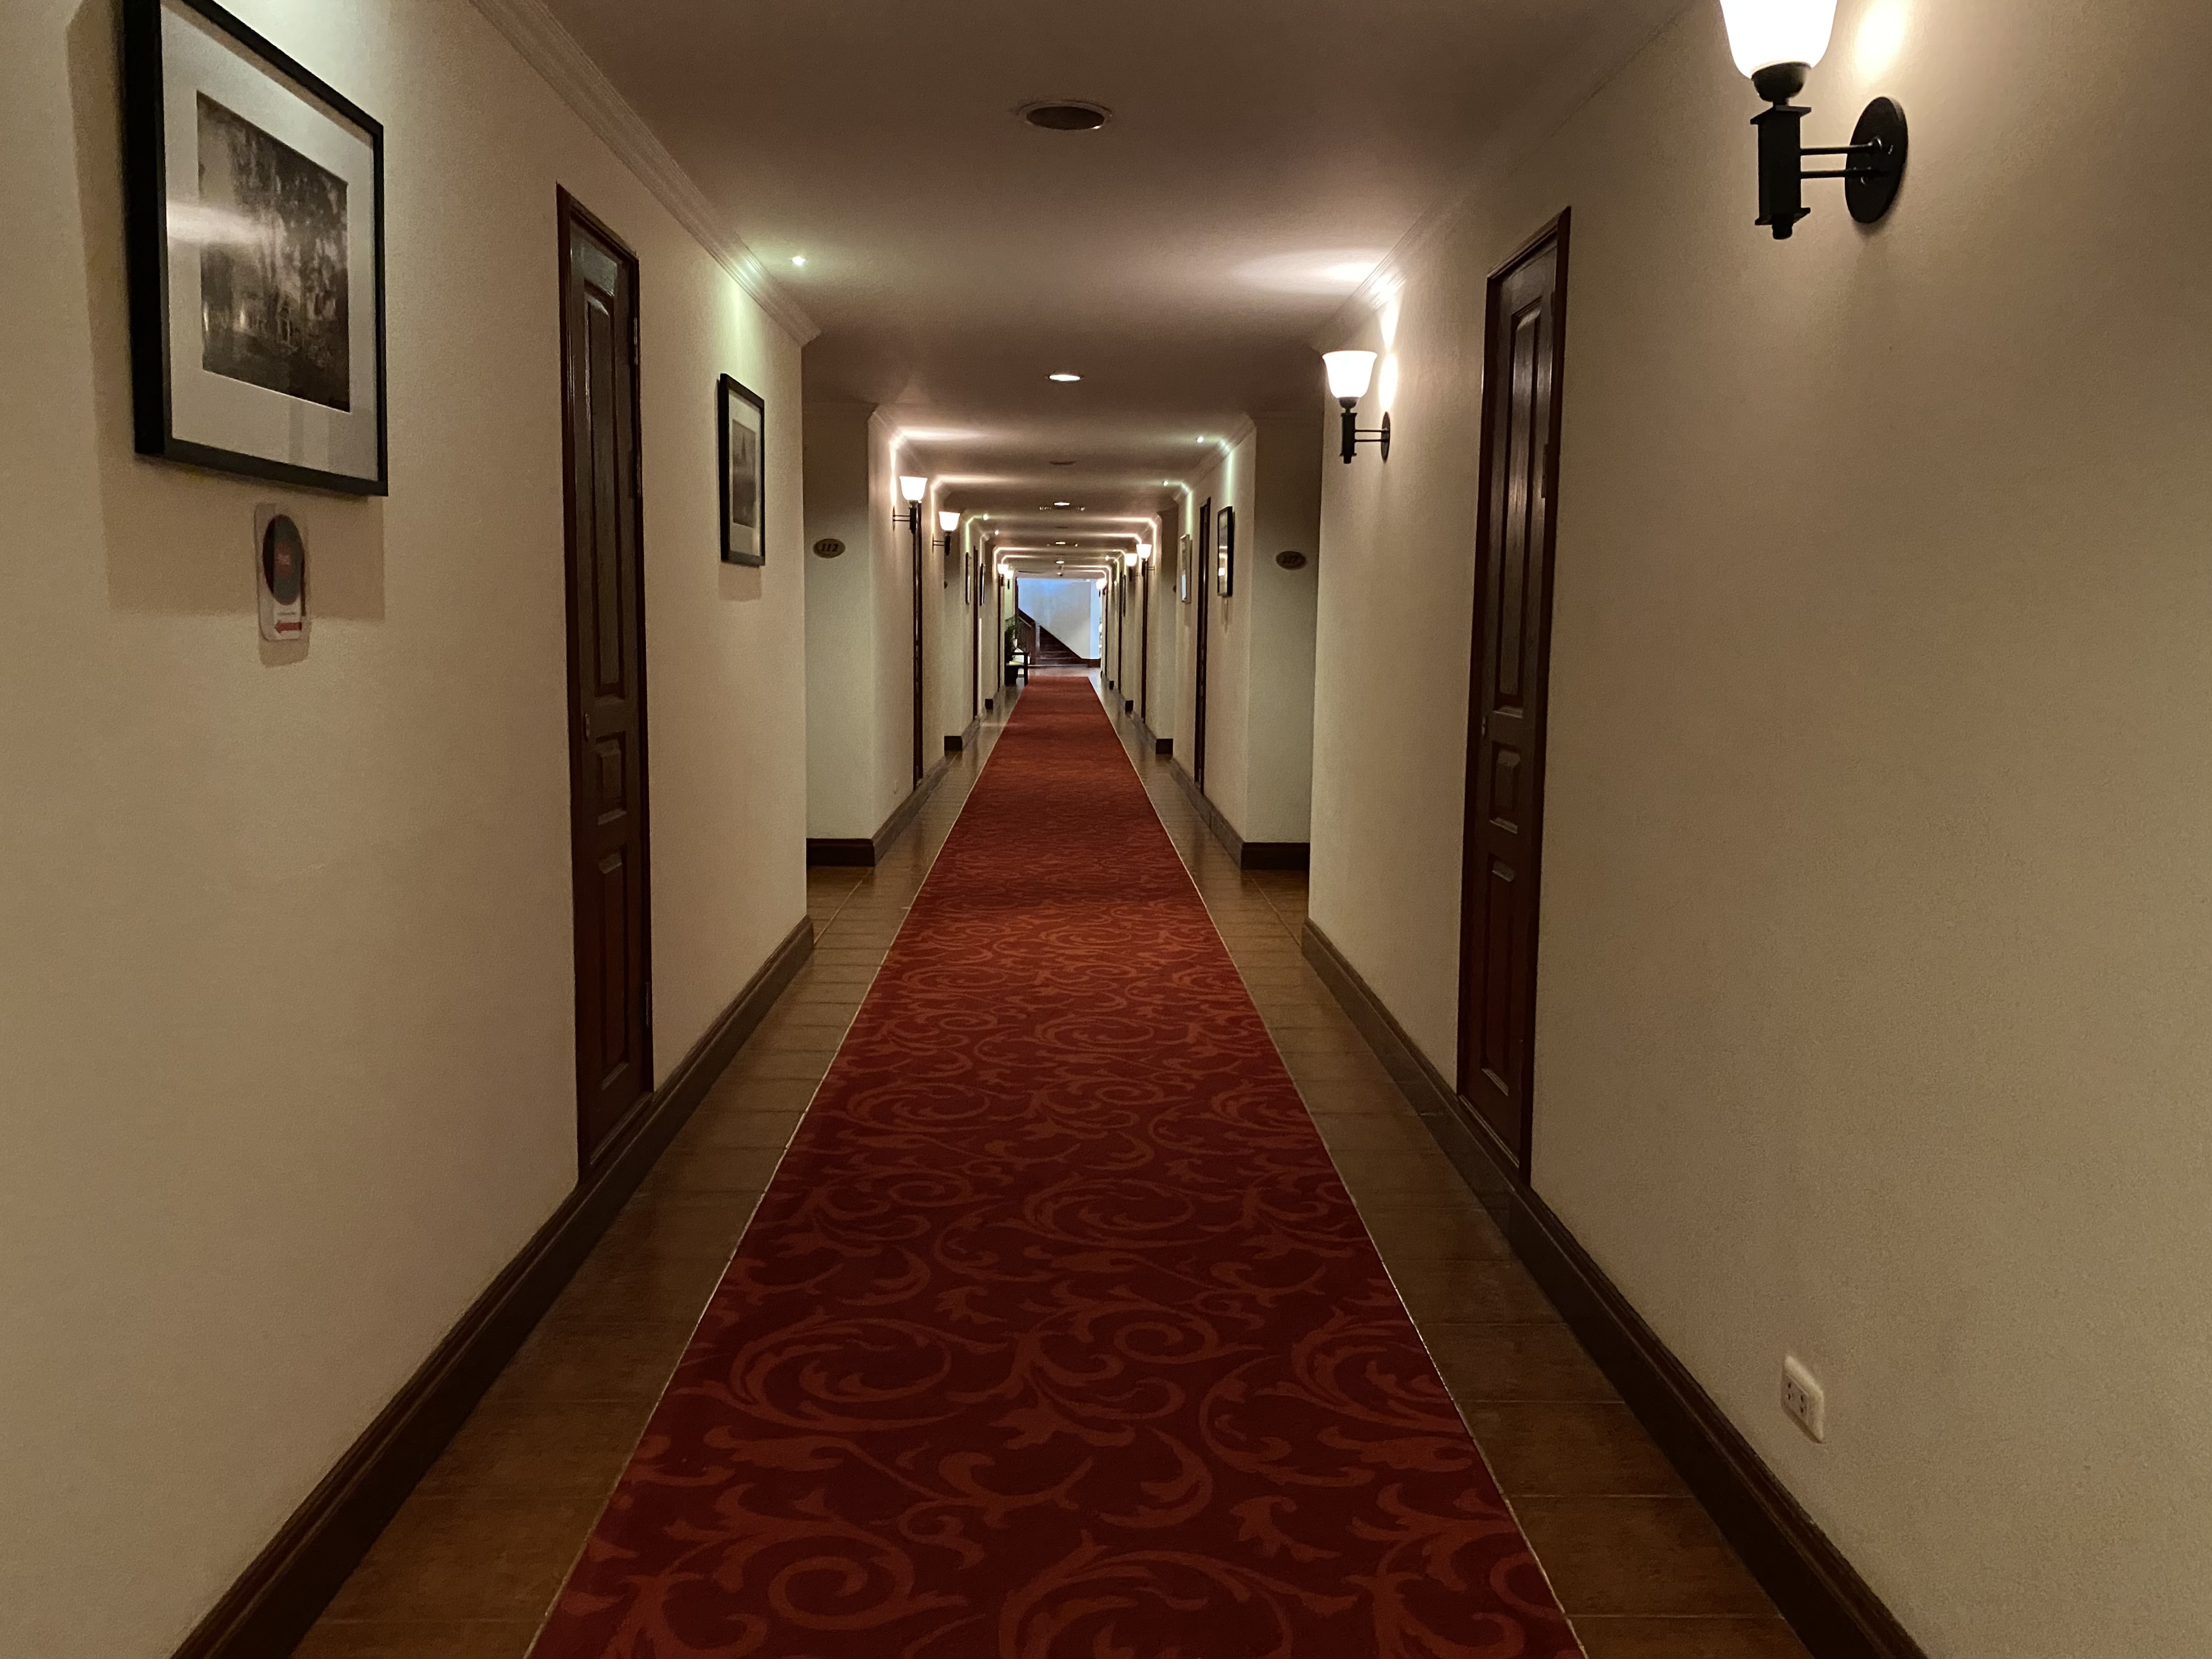 a long hallway with a red carpet